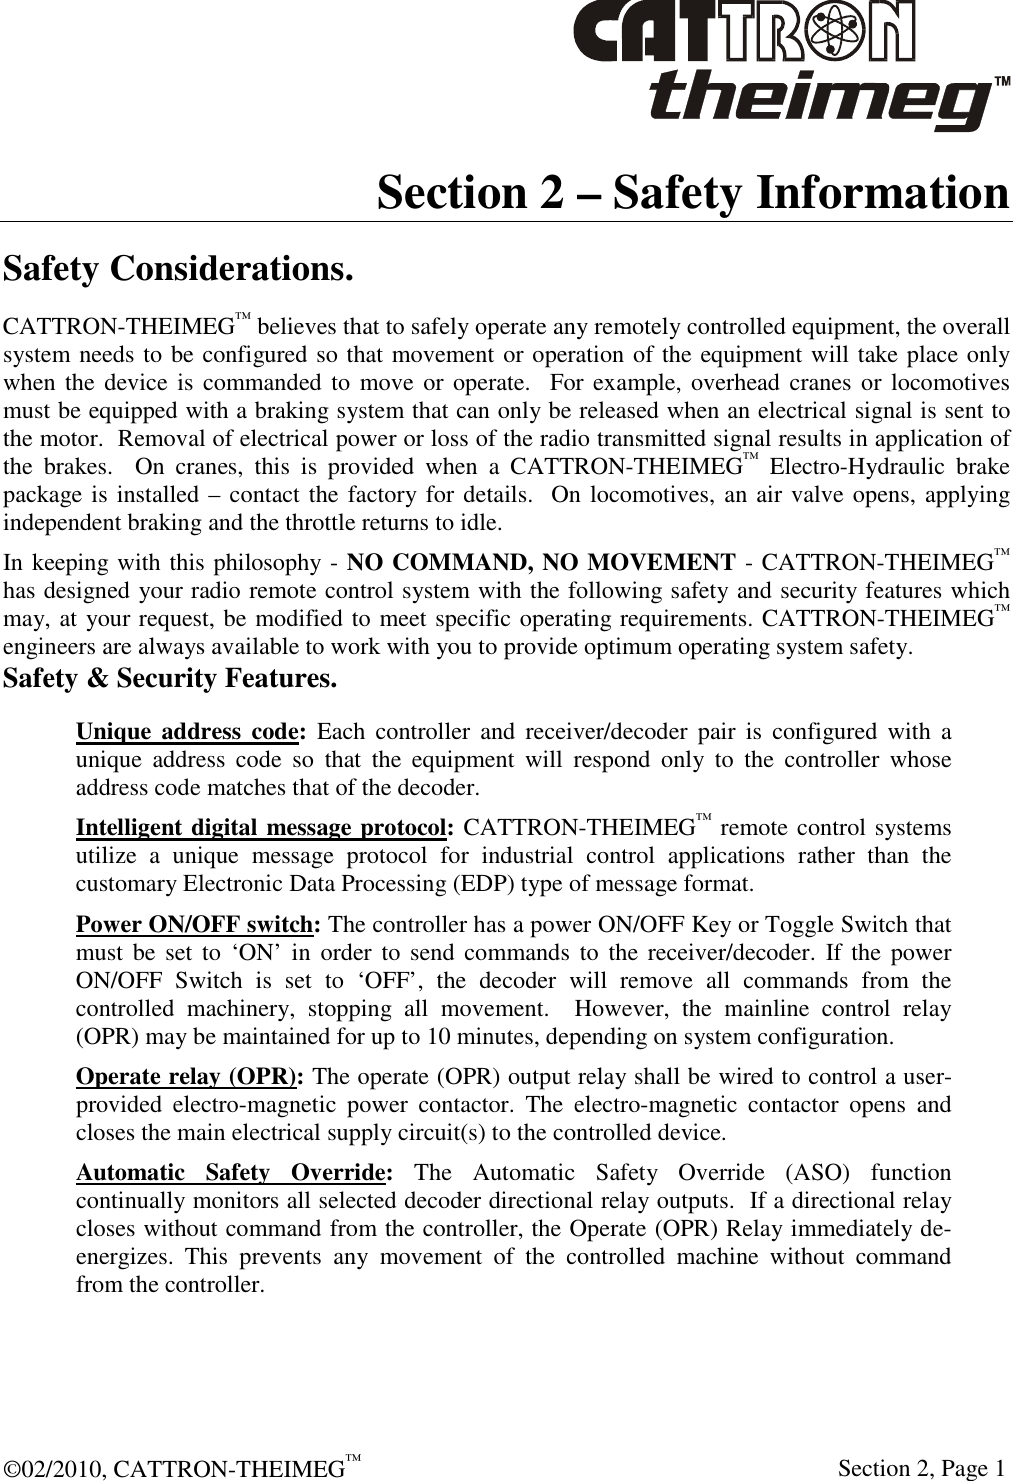  ©02/2010, CATTRON-THEIMEG™     Section 2, Page 1 Section 2 – Safety Information Safety Considerations. CATTRON-THEIMEG™ believes that to safely operate any remotely controlled equipment, the overall system needs to be configured so that movement or operation of the equipment will take place only when the  device  is  commanded  to  move or operate.   For example, overhead cranes or locomotives must be equipped with a braking system that can only be released when an electrical signal is sent to the motor.  Removal of electrical power or loss of the radio transmitted signal results in application of the  brakes.    On  cranes,  this  is  provided  when  a  CATTRON-THEIMEG™  Electro-Hydraulic  brake package is installed – contact the factory for details.  On locomotives, an air valve opens, applying independent braking and the throttle returns to idle.  In keeping with this philosophy - NO COMMAND, NO MOVEMENT - CATTRON-THEIMEG™ has designed your radio remote control system with the following safety and security features which may, at your request, be modified to meet specific operating requirements. CATTRON-THEIMEG™ engineers are always available to work with you to provide optimum operating system safety.  Safety &amp; Security Features. Unique  address  code:  Each  controller  and  receiver/decoder  pair  is  configured  with  a unique  address  code  so  that  the  equipment  will  respond  only  to  the  controller  whose address code matches that of the decoder. Intelligent digital message protocol: CATTRON-THEIMEG™ remote control systems utilize  a  unique  message  protocol  for  industrial  control  applications  rather  than  the customary Electronic Data Processing (EDP) type of message format. Power ON/OFF switch: The controller has a power ON/OFF Key or Toggle Switch that must be set  to  ‘ON’  in  order  to  send commands  to the receiver/decoder.  If the  power ON/OFF  Switch  is  set  to  ‘OFF’,  the  decoder  will  remove  all  commands  from  the controlled  machinery,  stopping  all  movement.    However,  the  mainline  control  relay (OPR) may be maintained for up to 10 minutes, depending on system configuration. Operate relay (OPR): The operate (OPR) output relay shall be wired to control a user-provided  electro-magnetic  power  contactor.  The  electro-magnetic  contactor  opens  and closes the main electrical supply circuit(s) to the controlled device. Automatic  Safety  Override:  The  Automatic  Safety  Override  (ASO)  function continually monitors all selected decoder directional relay outputs.  If a directional relay closes without command from the controller, the Operate (OPR) Relay immediately de-energizes.  This  prevents  any  movement  of  the  controlled  machine  without  command from the controller.  